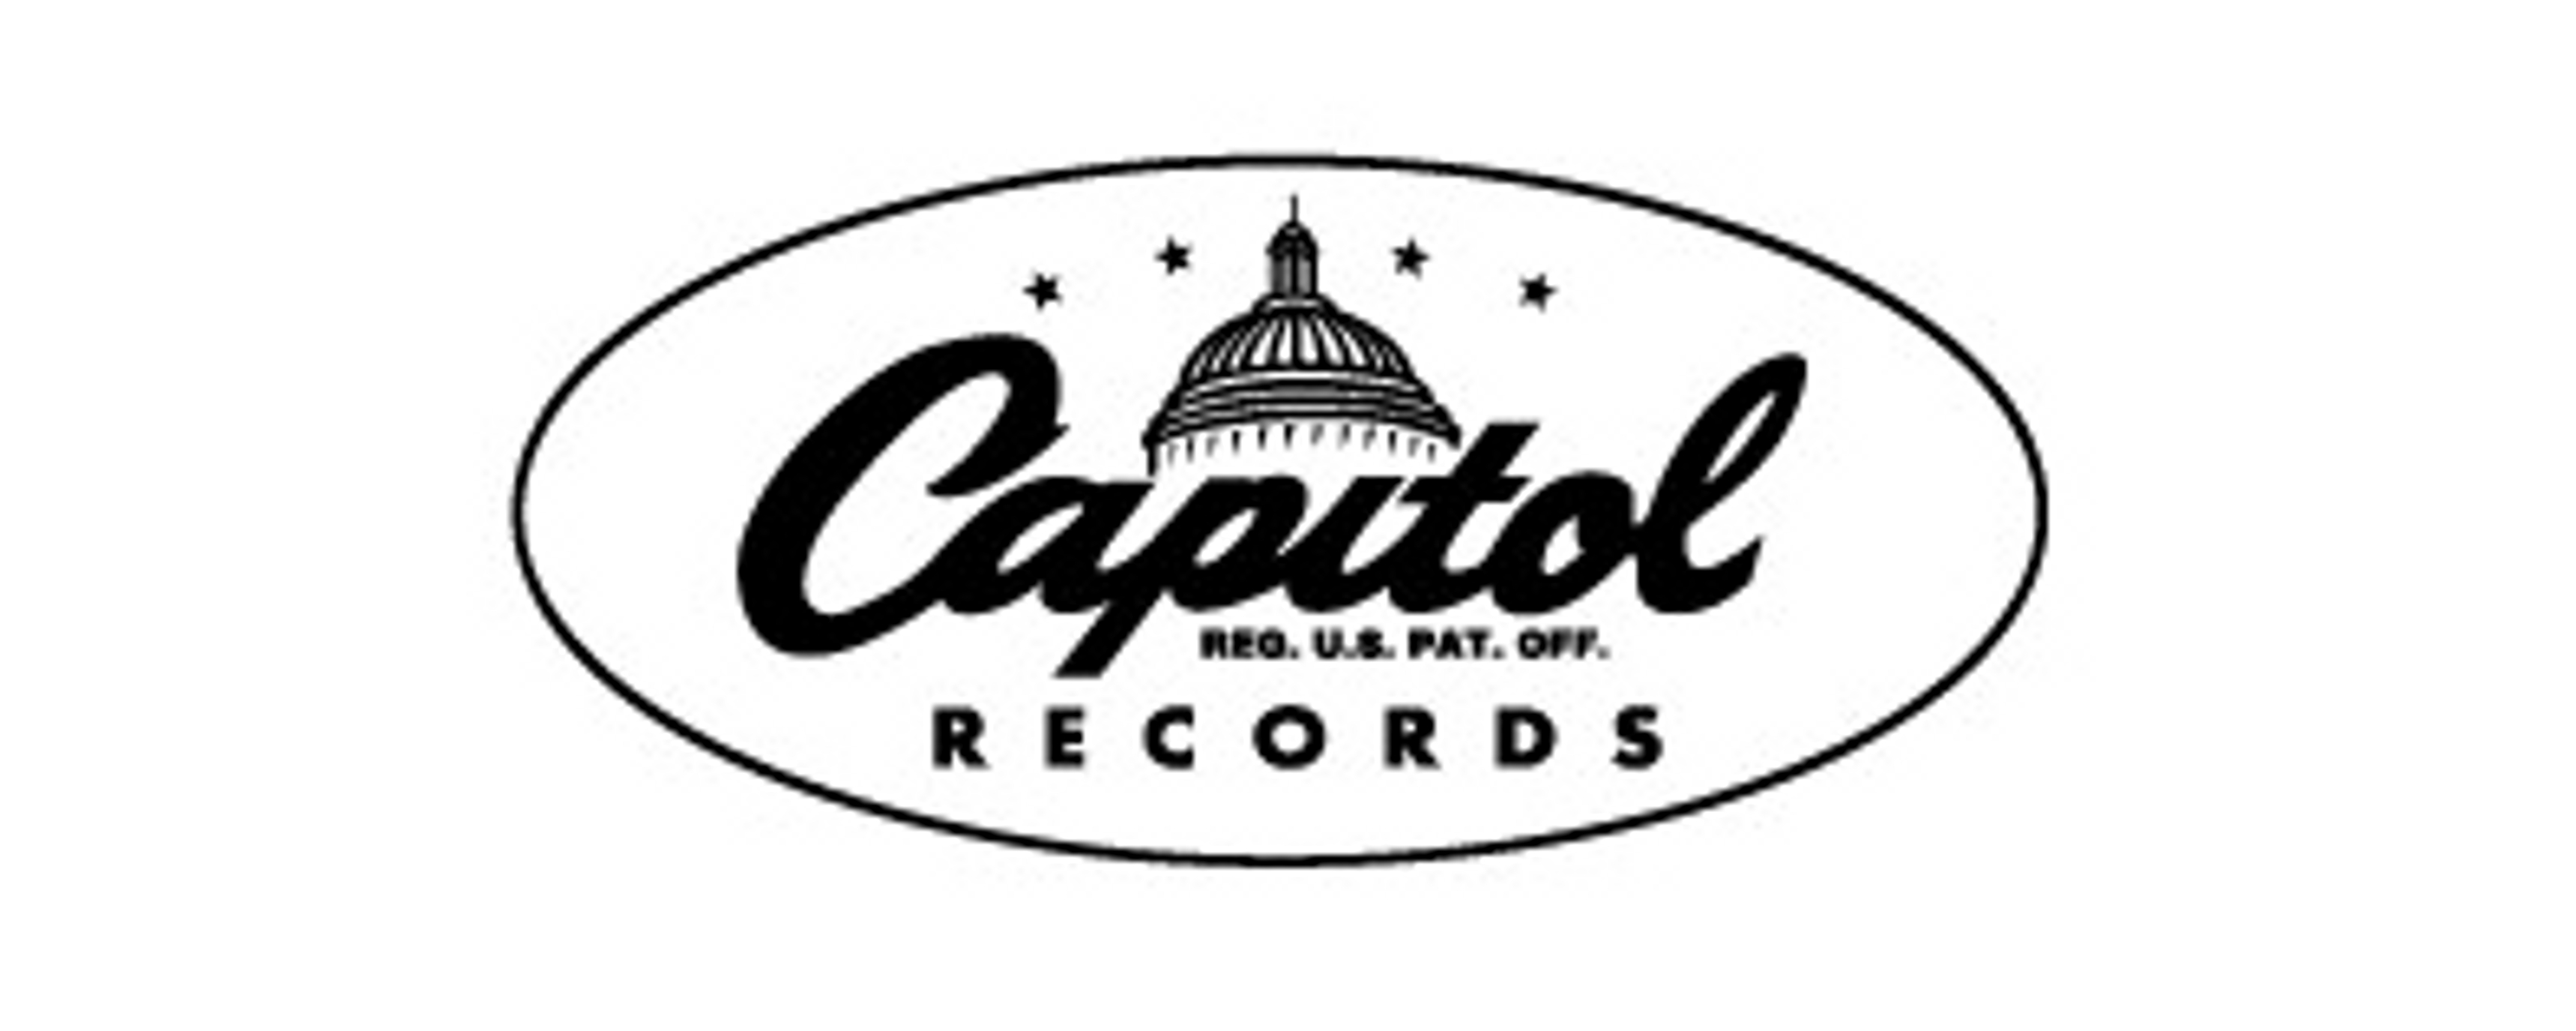 capitol records phone number los angeles